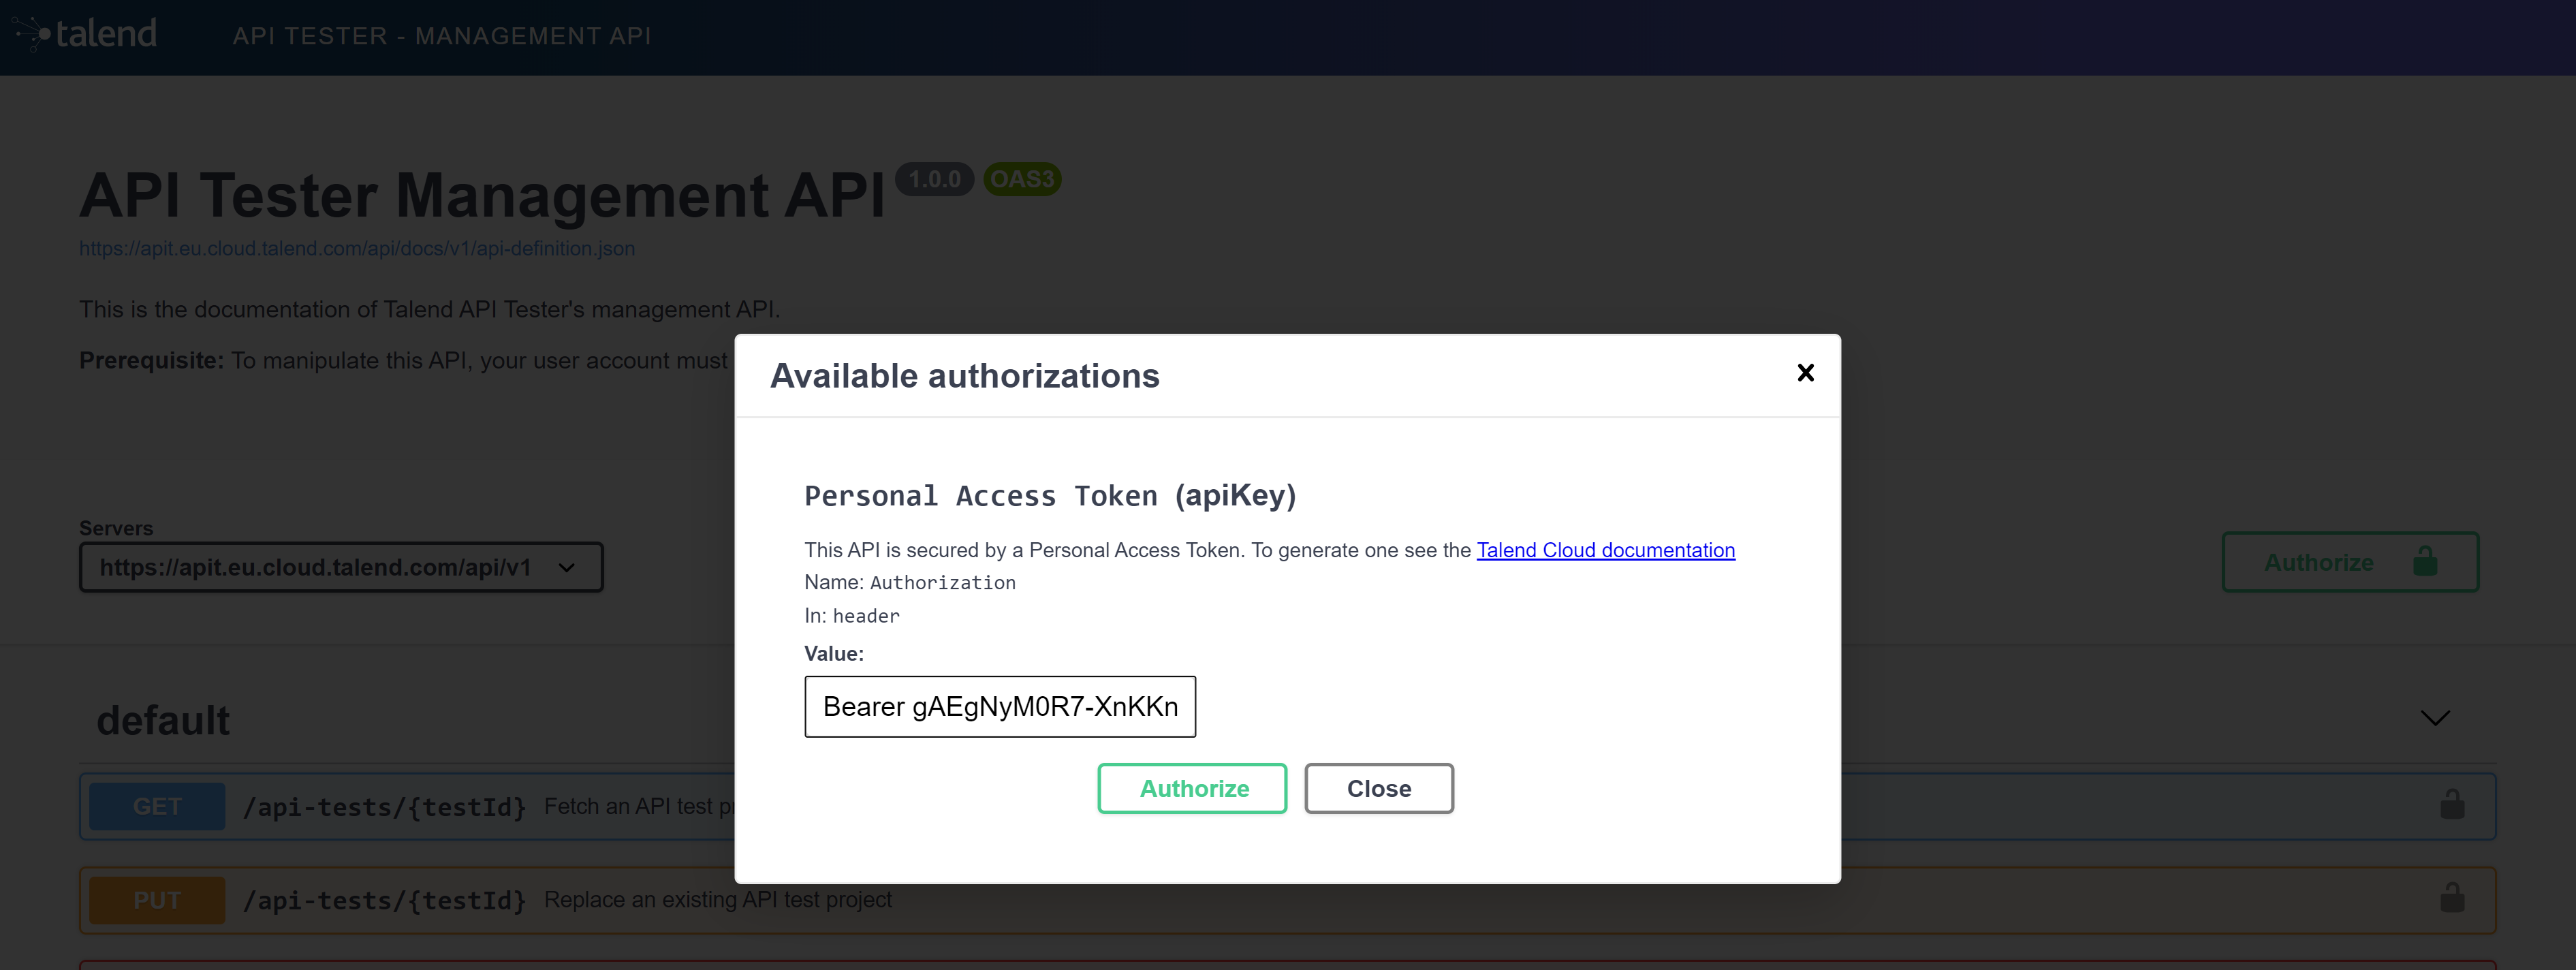 Example of a personal access token on the Swagger page.